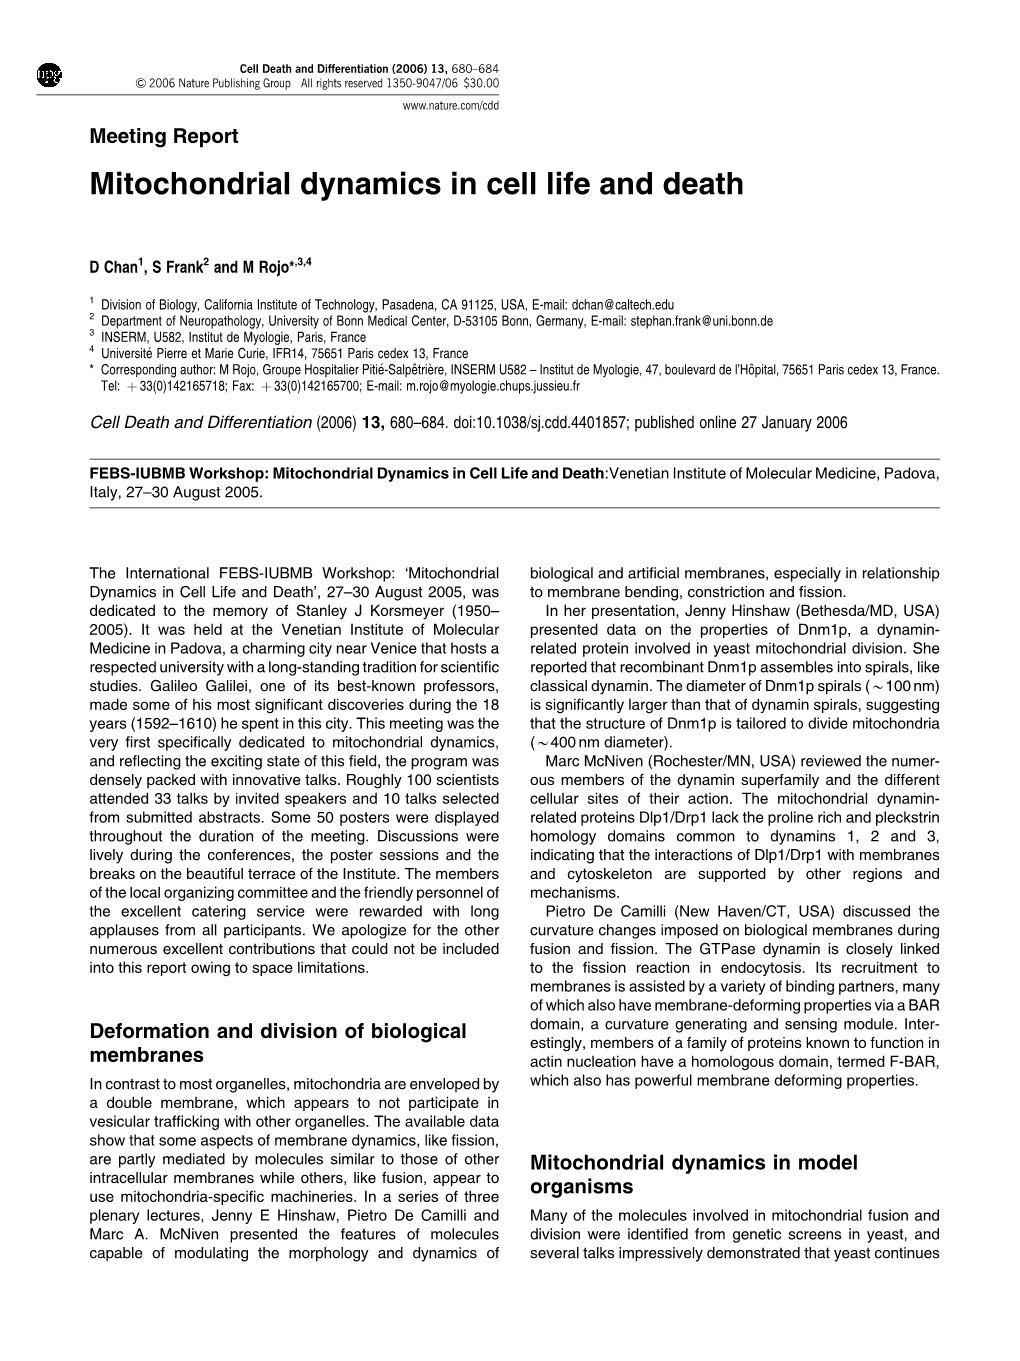 Mitochondrial Dynamics in Cell Life and Death